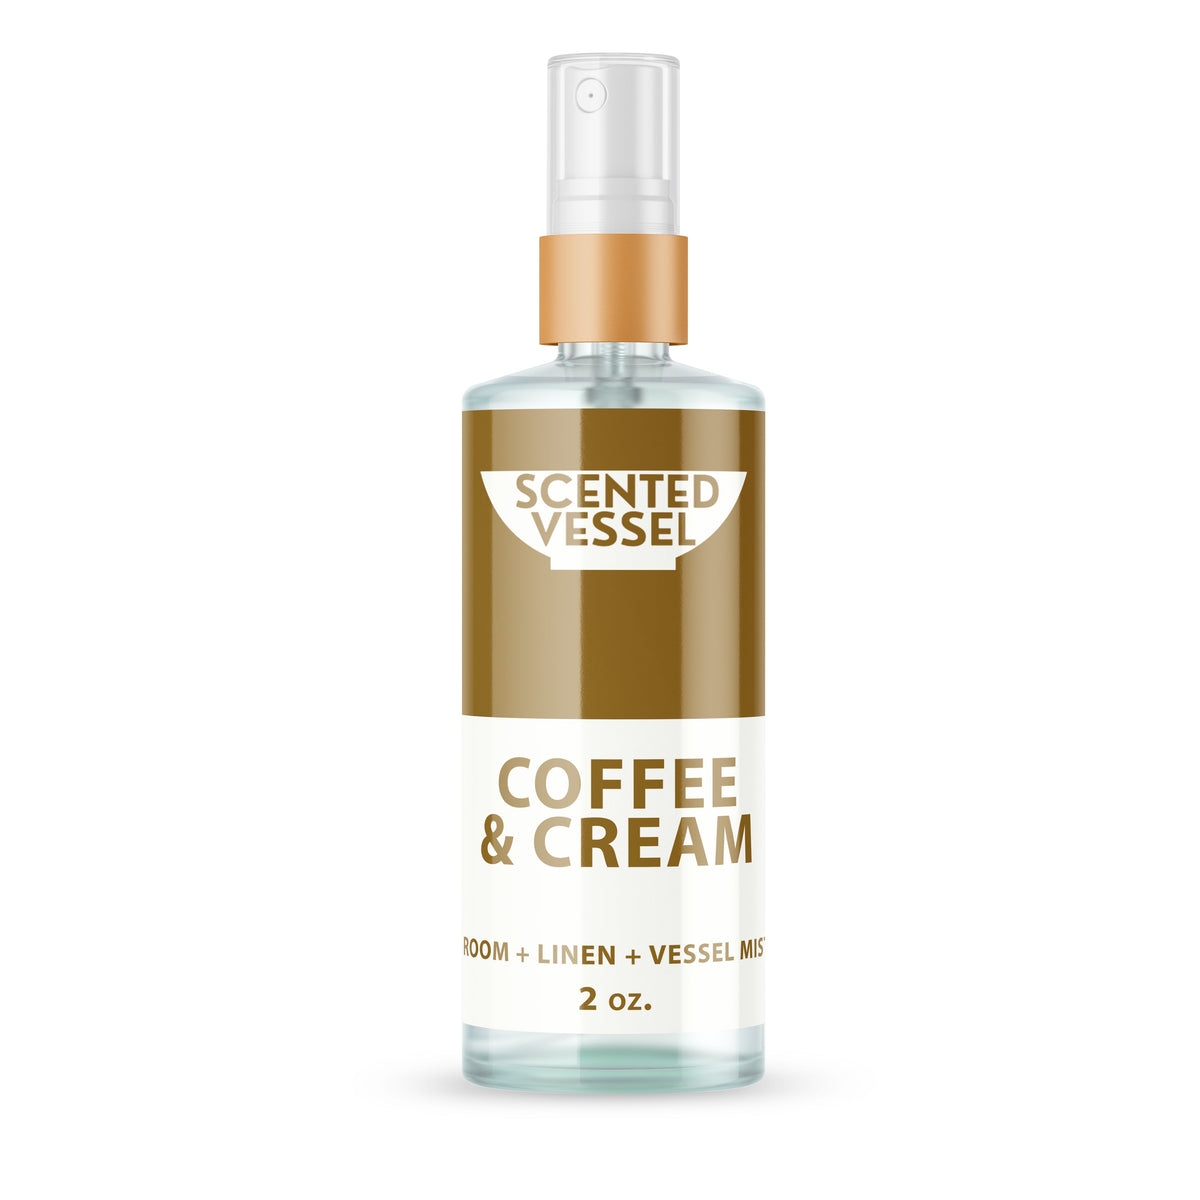 Coffee & Cream 2oz Fragrance Mist by Scented Vessel